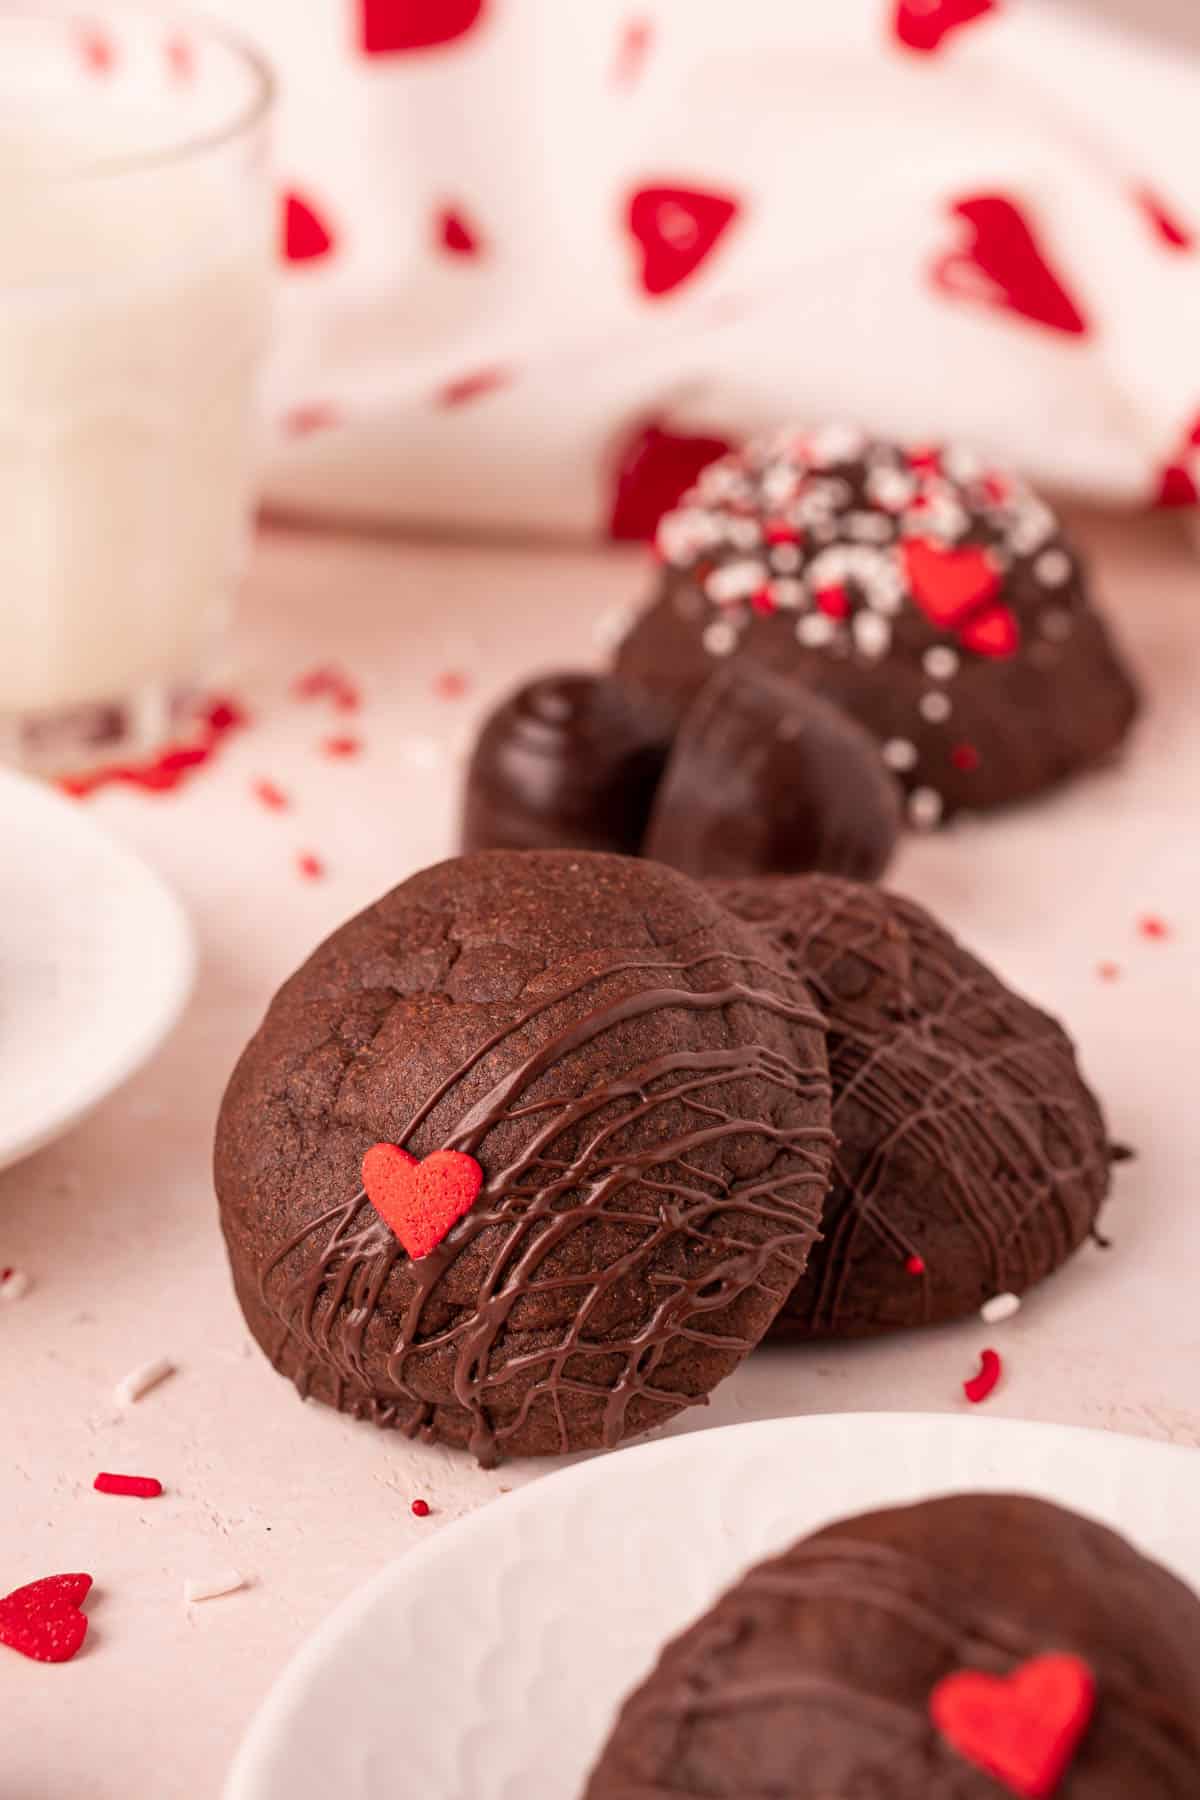 Chocolate cookies that are stuffed with cherry cordials are on a pink surface.